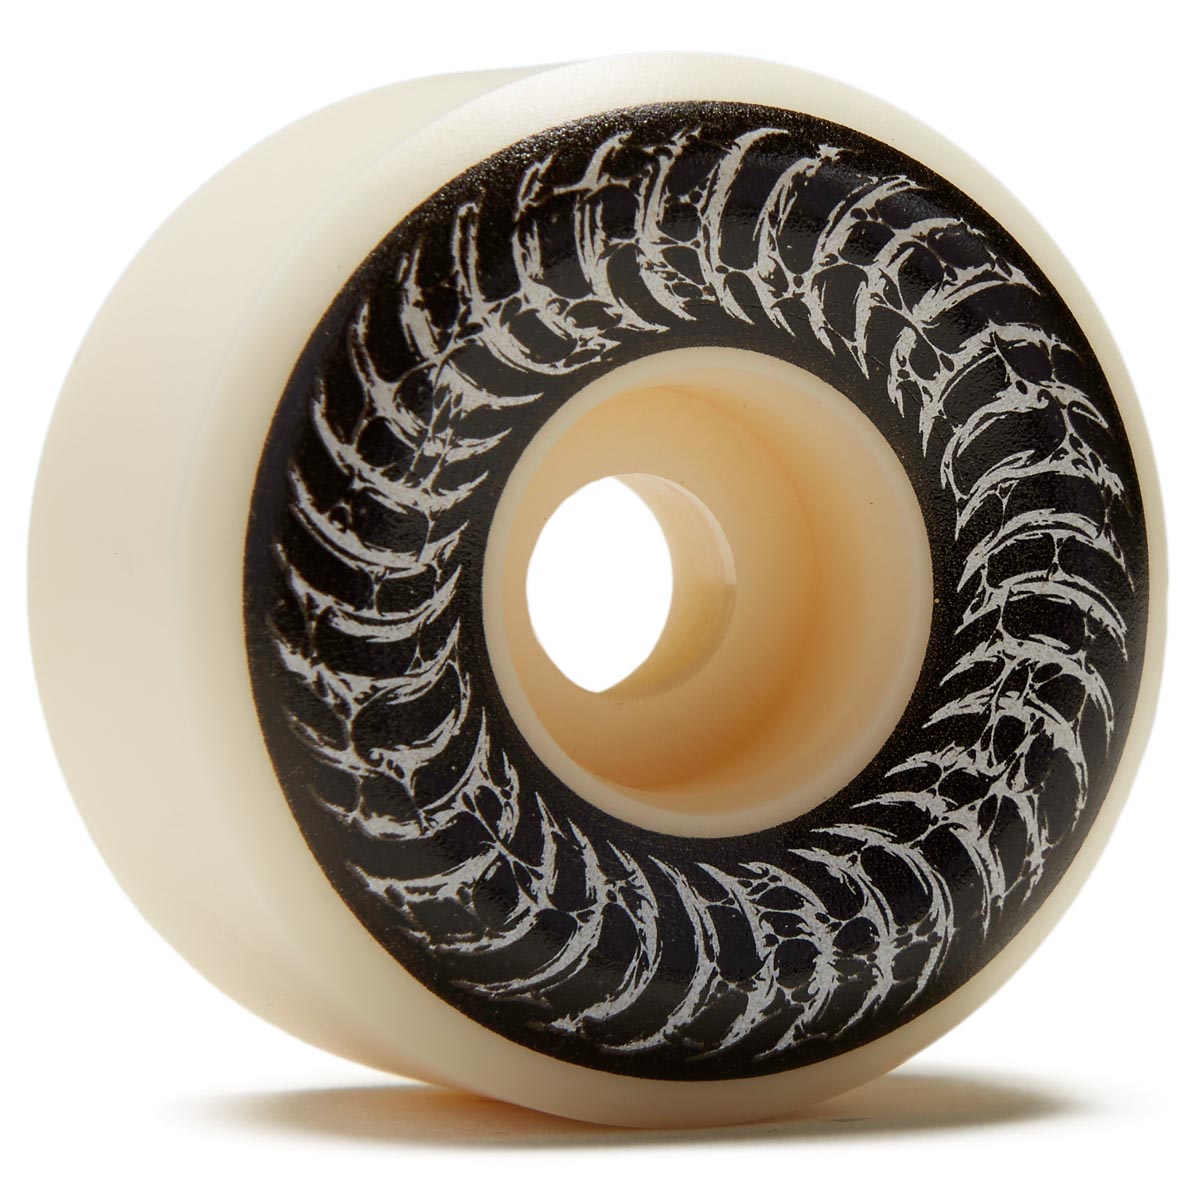 Spitfire F4 99 Decay Conical Full Skateboard Wheels - Natural - 56mm image 1